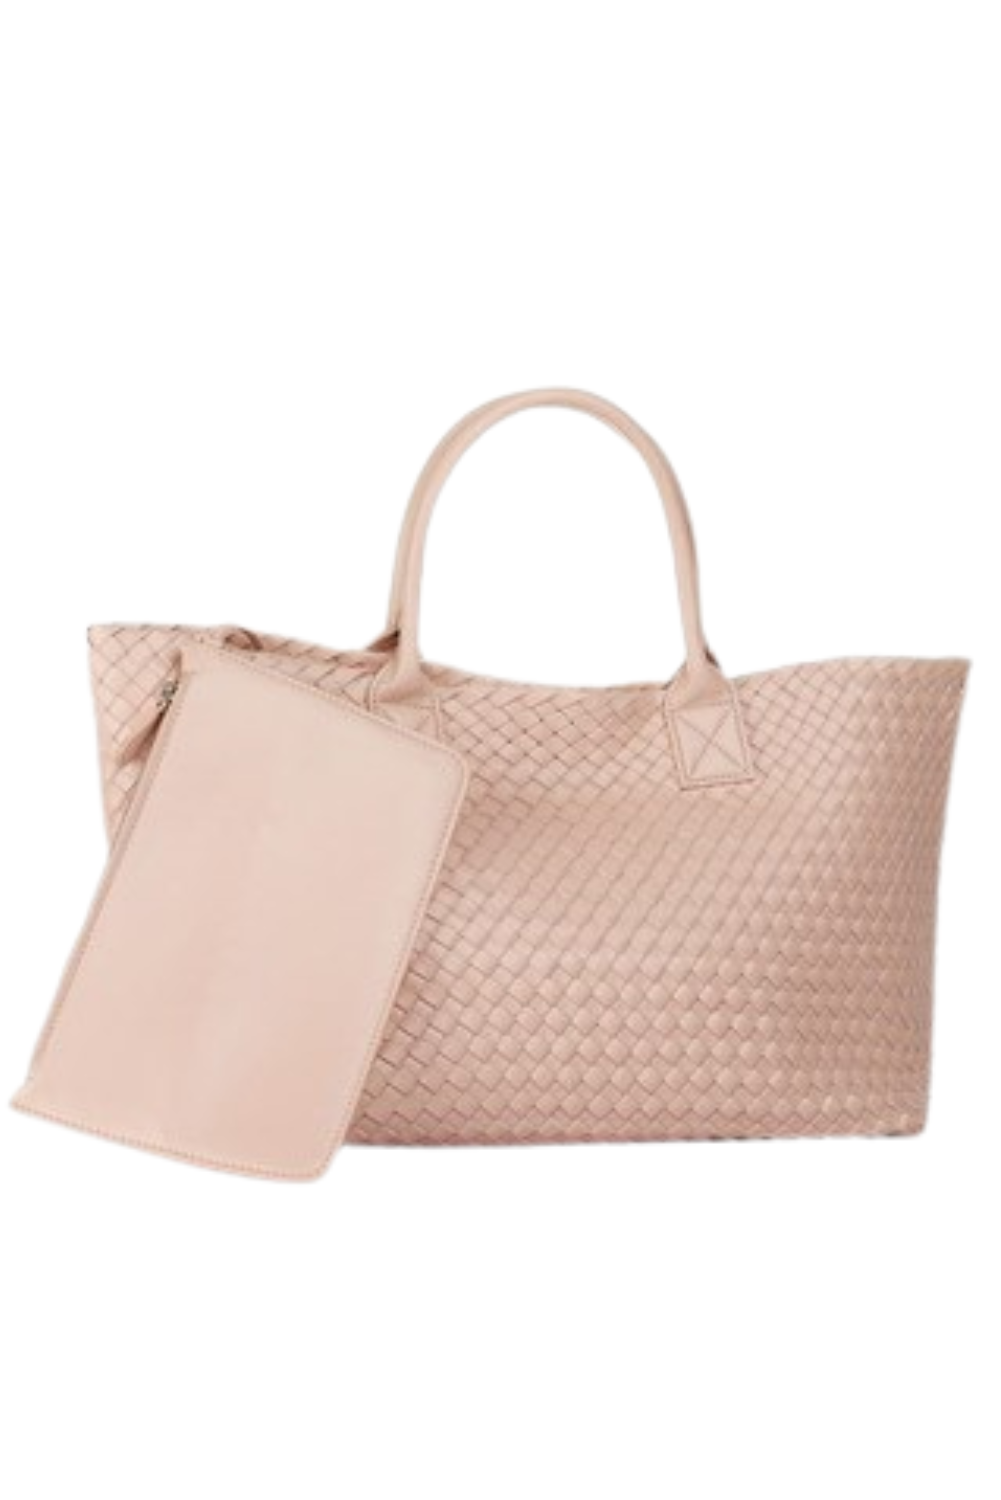 Neoprene Woven Tote Bag Pink color Large Size Set 40% off! Free Ship!